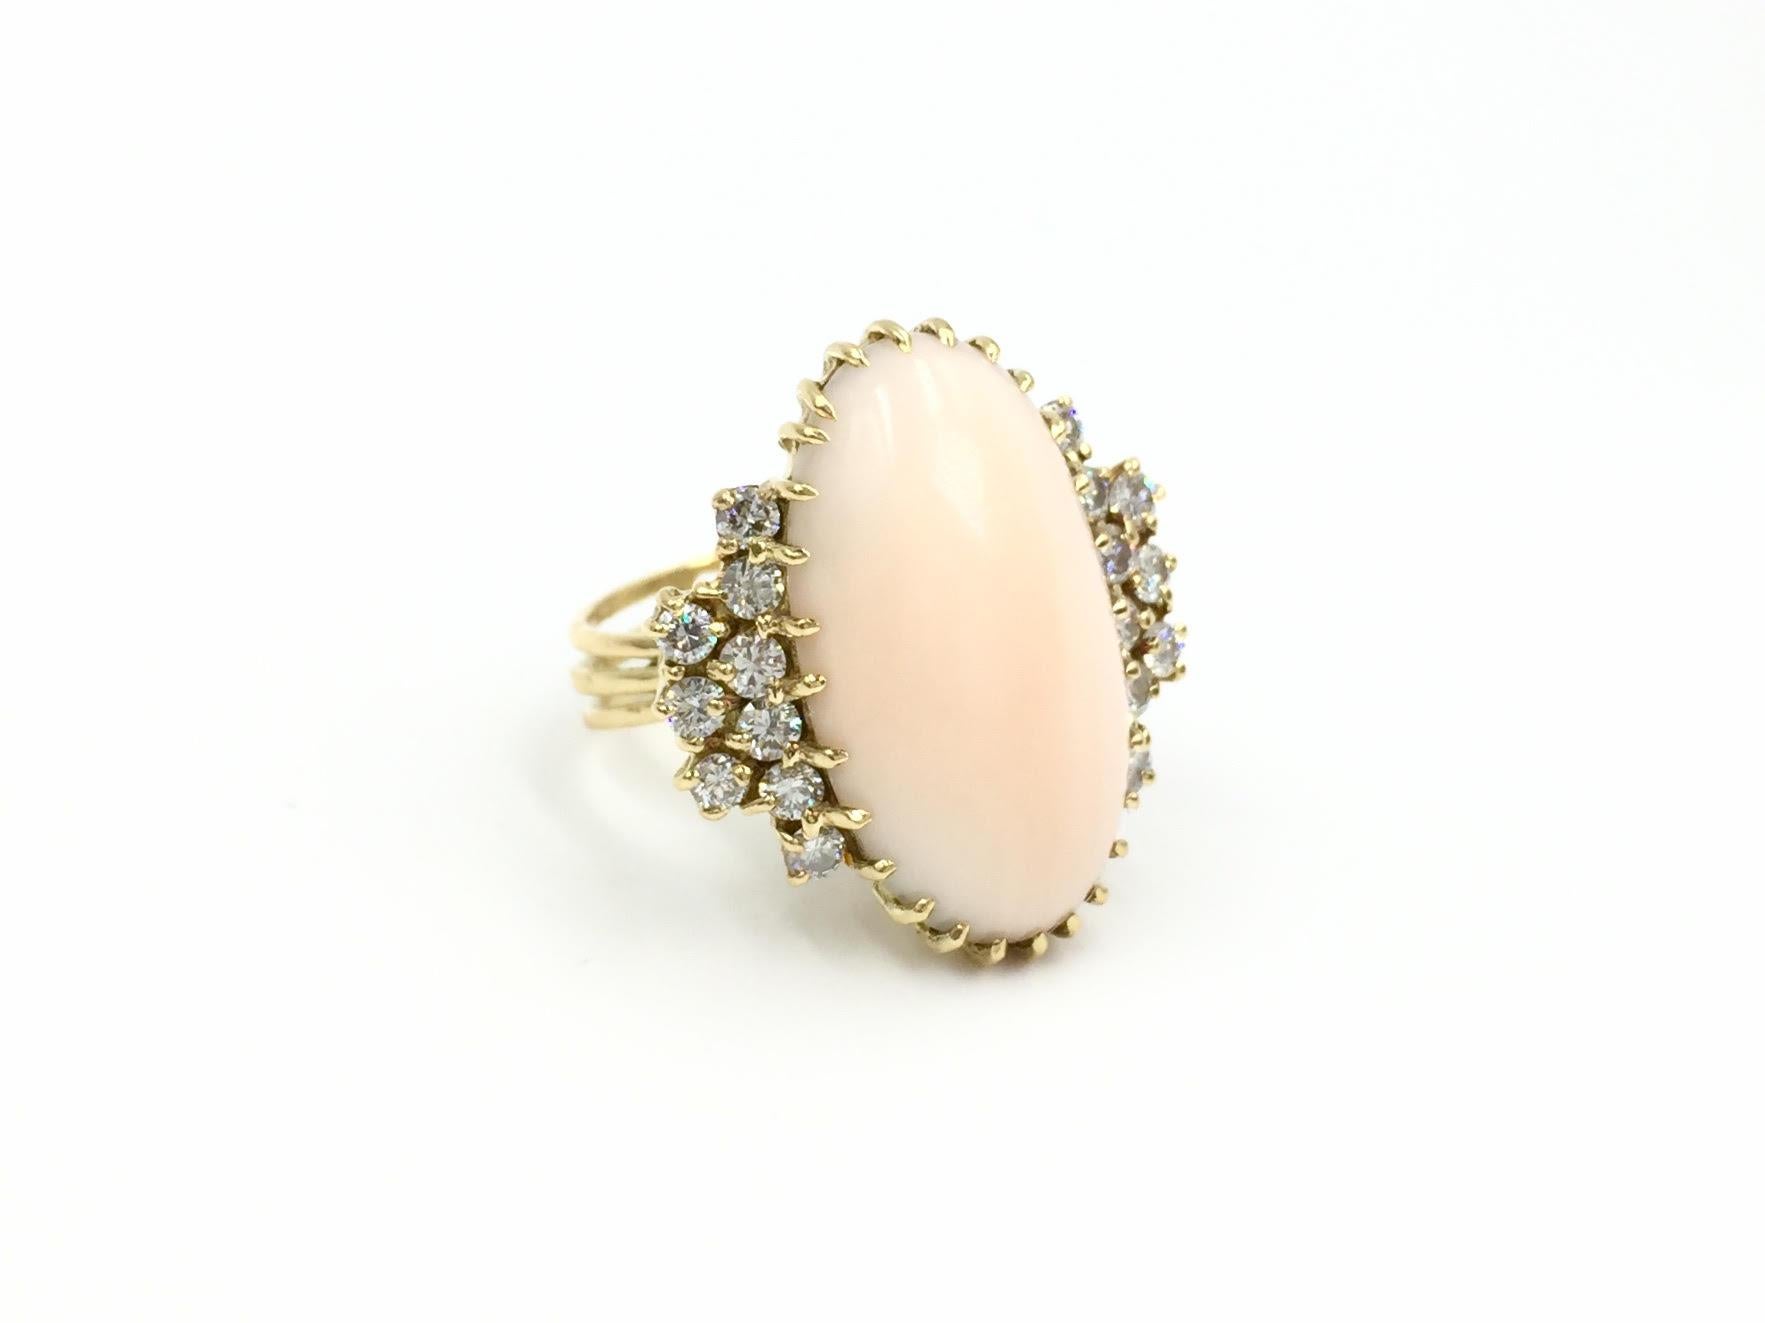 Circa 1960's. This beautiful 18 karat yellow gold vintage oval 'angel skin' (pale pink) coral ring features approximately .50 carat of round brilliant diamonds. Diamonds are approximately G color, SI1 clarity. Shank is split in three rows with a